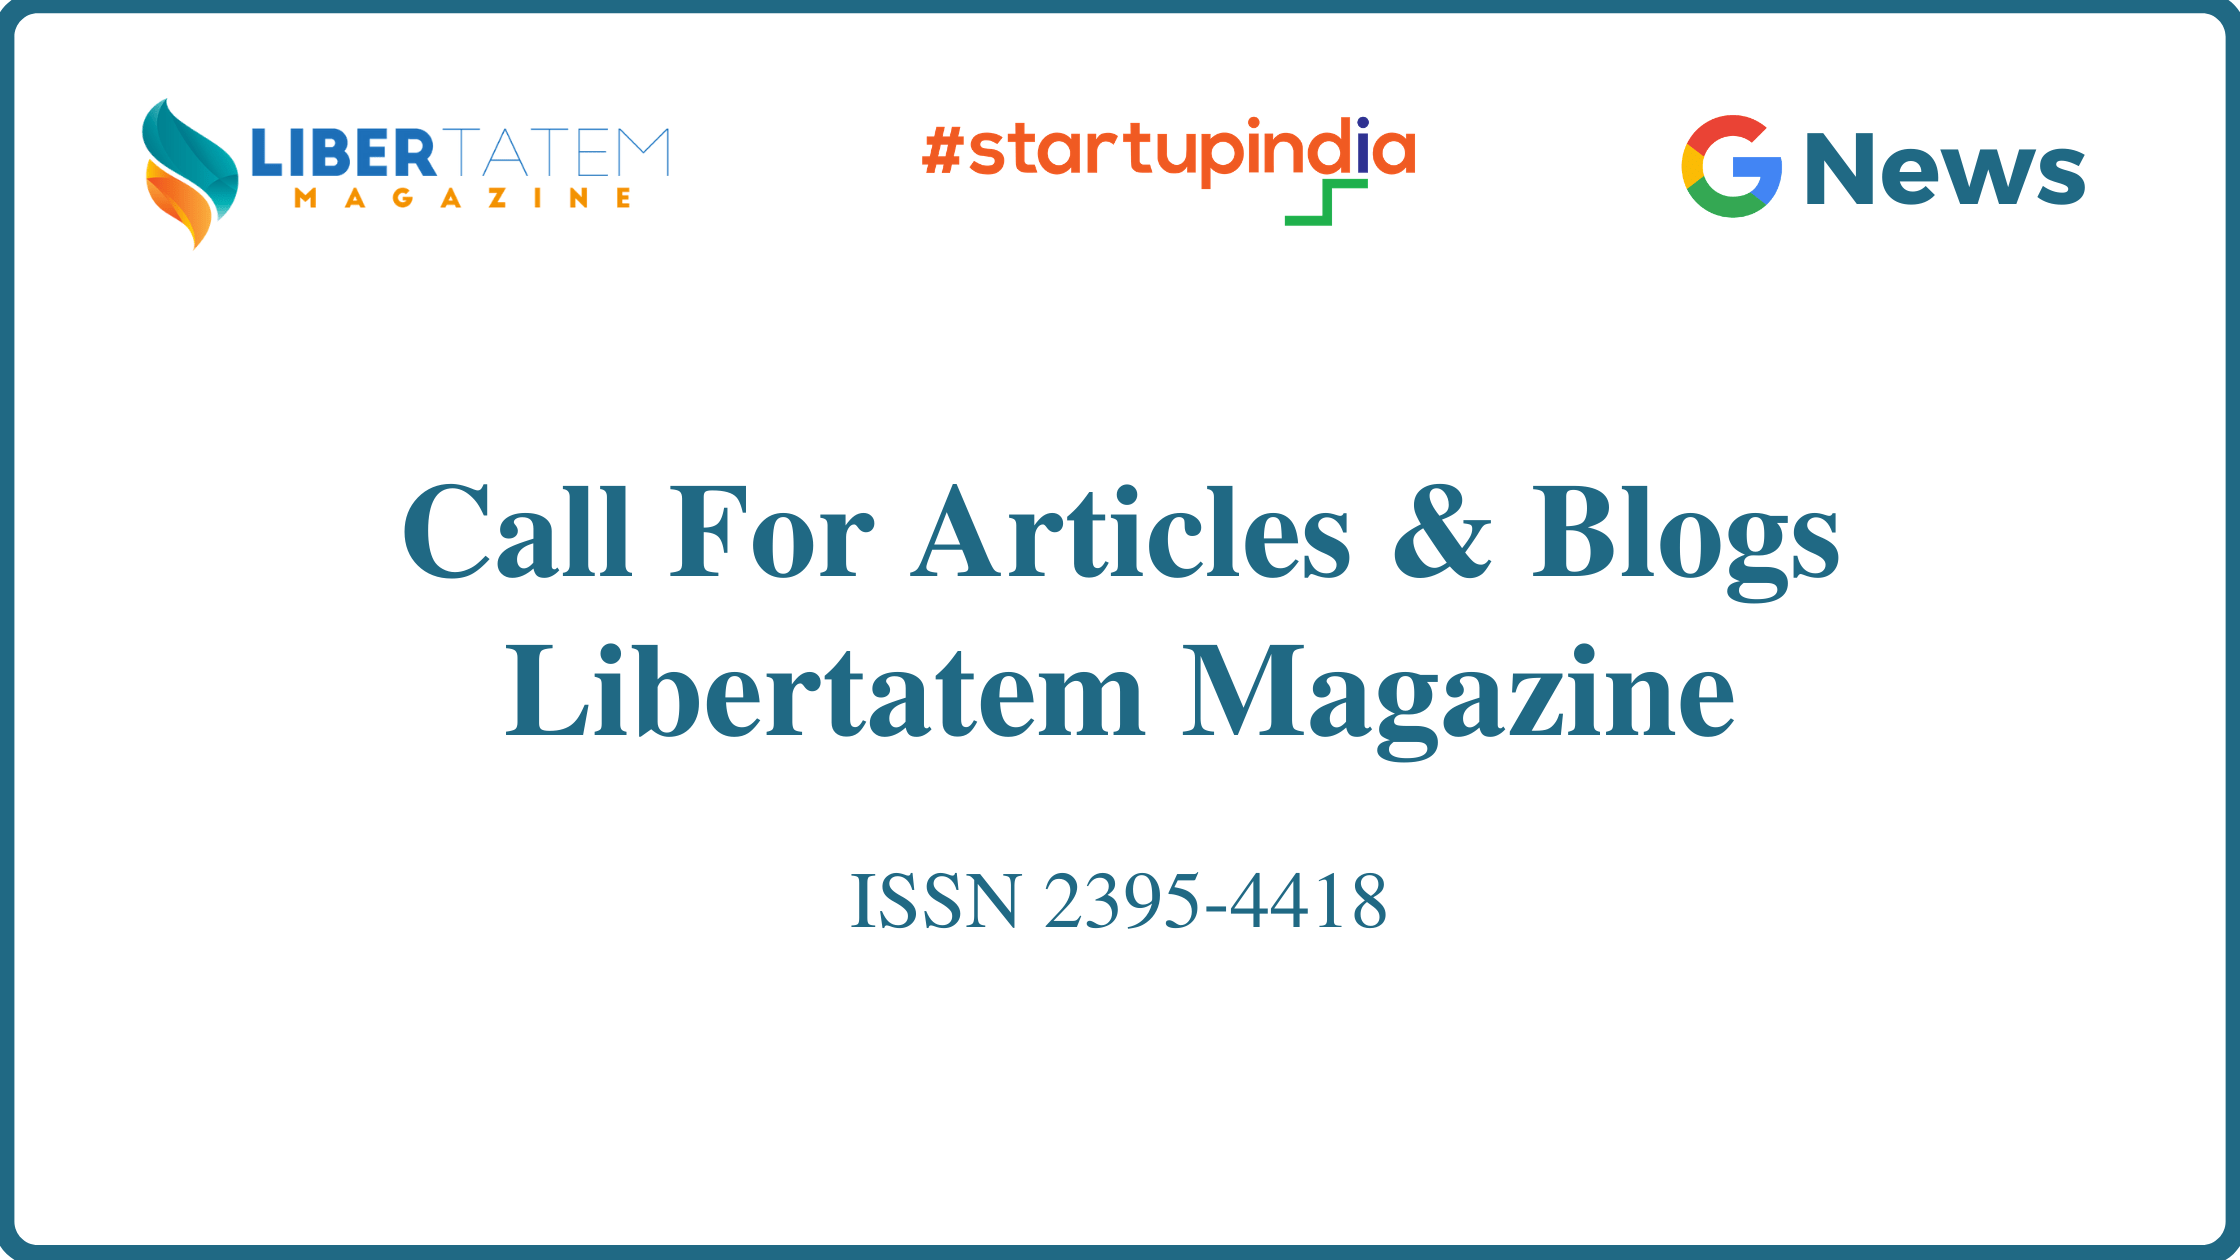 Call For Articles & Blogs by Libertatem Magazine